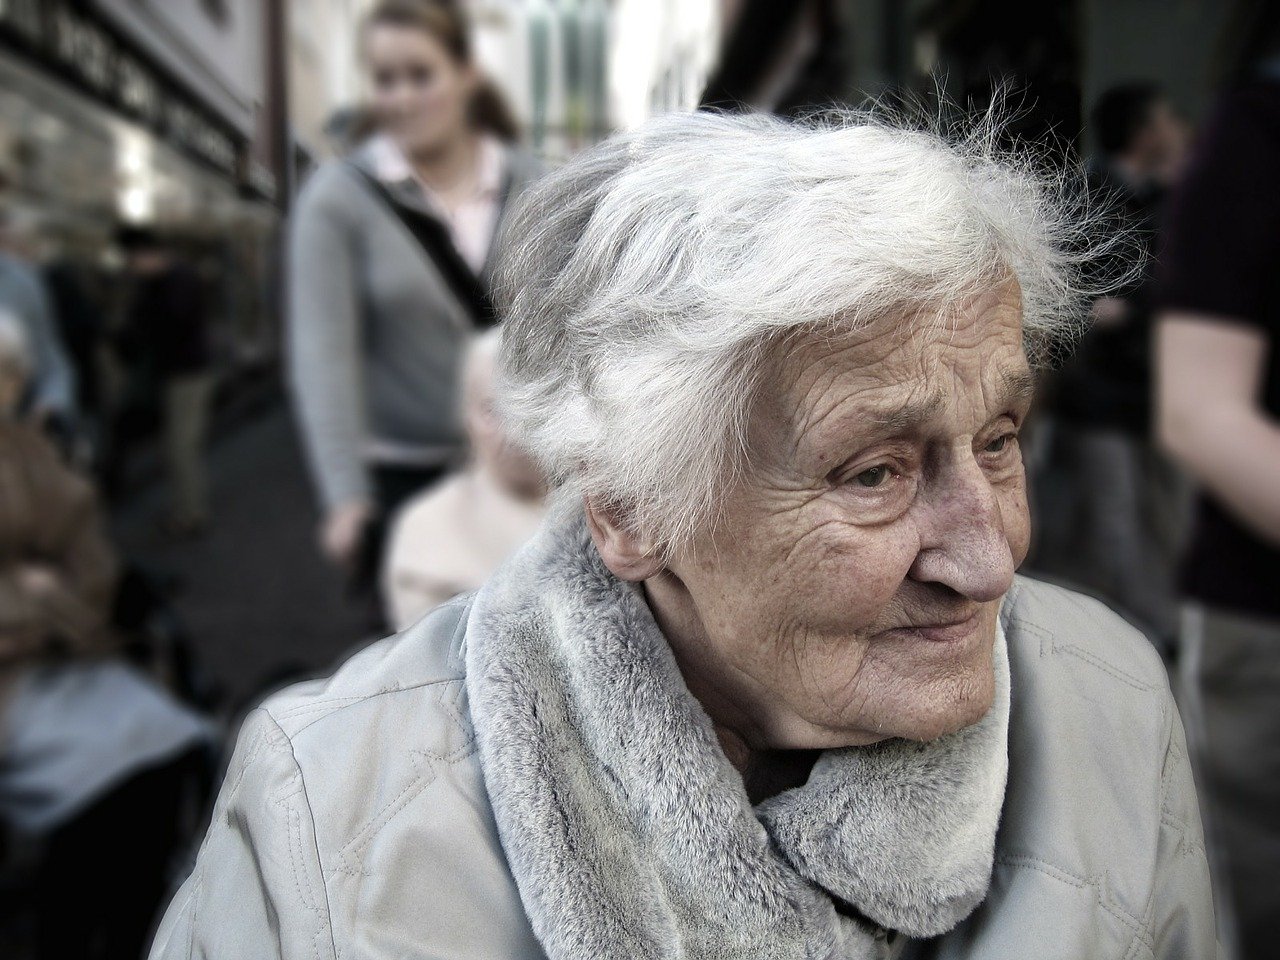 Caring for the Health and Emotional Wellbeing of Seniors During the Pandemic